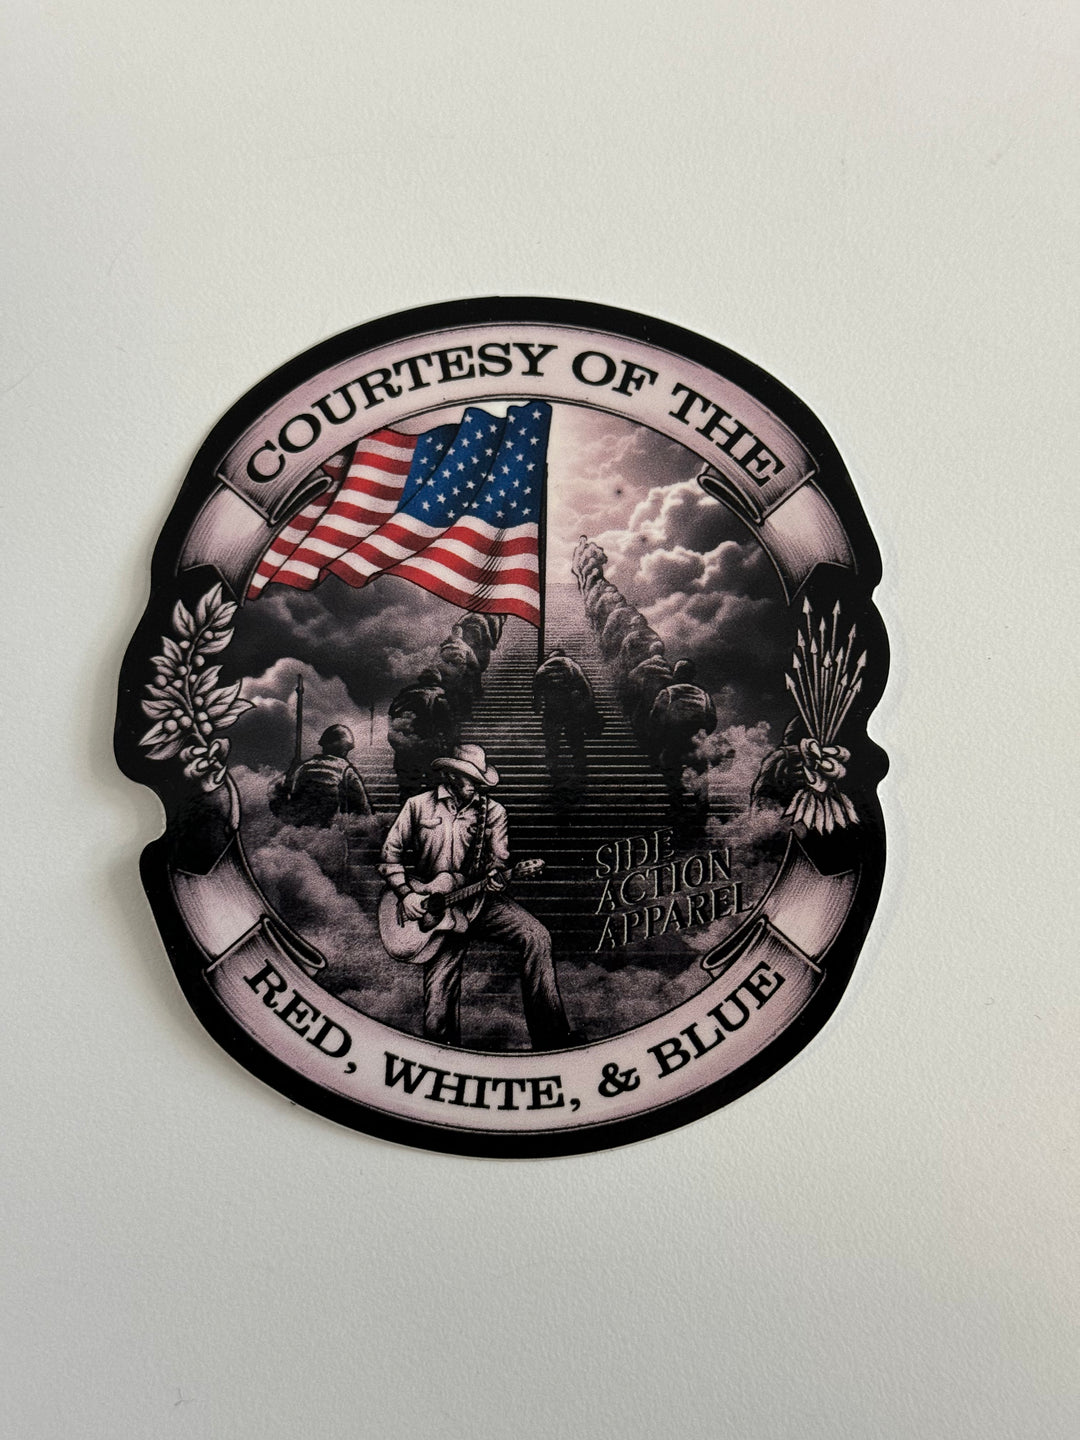 Courtesy of the Red, White and Blue - Sticker